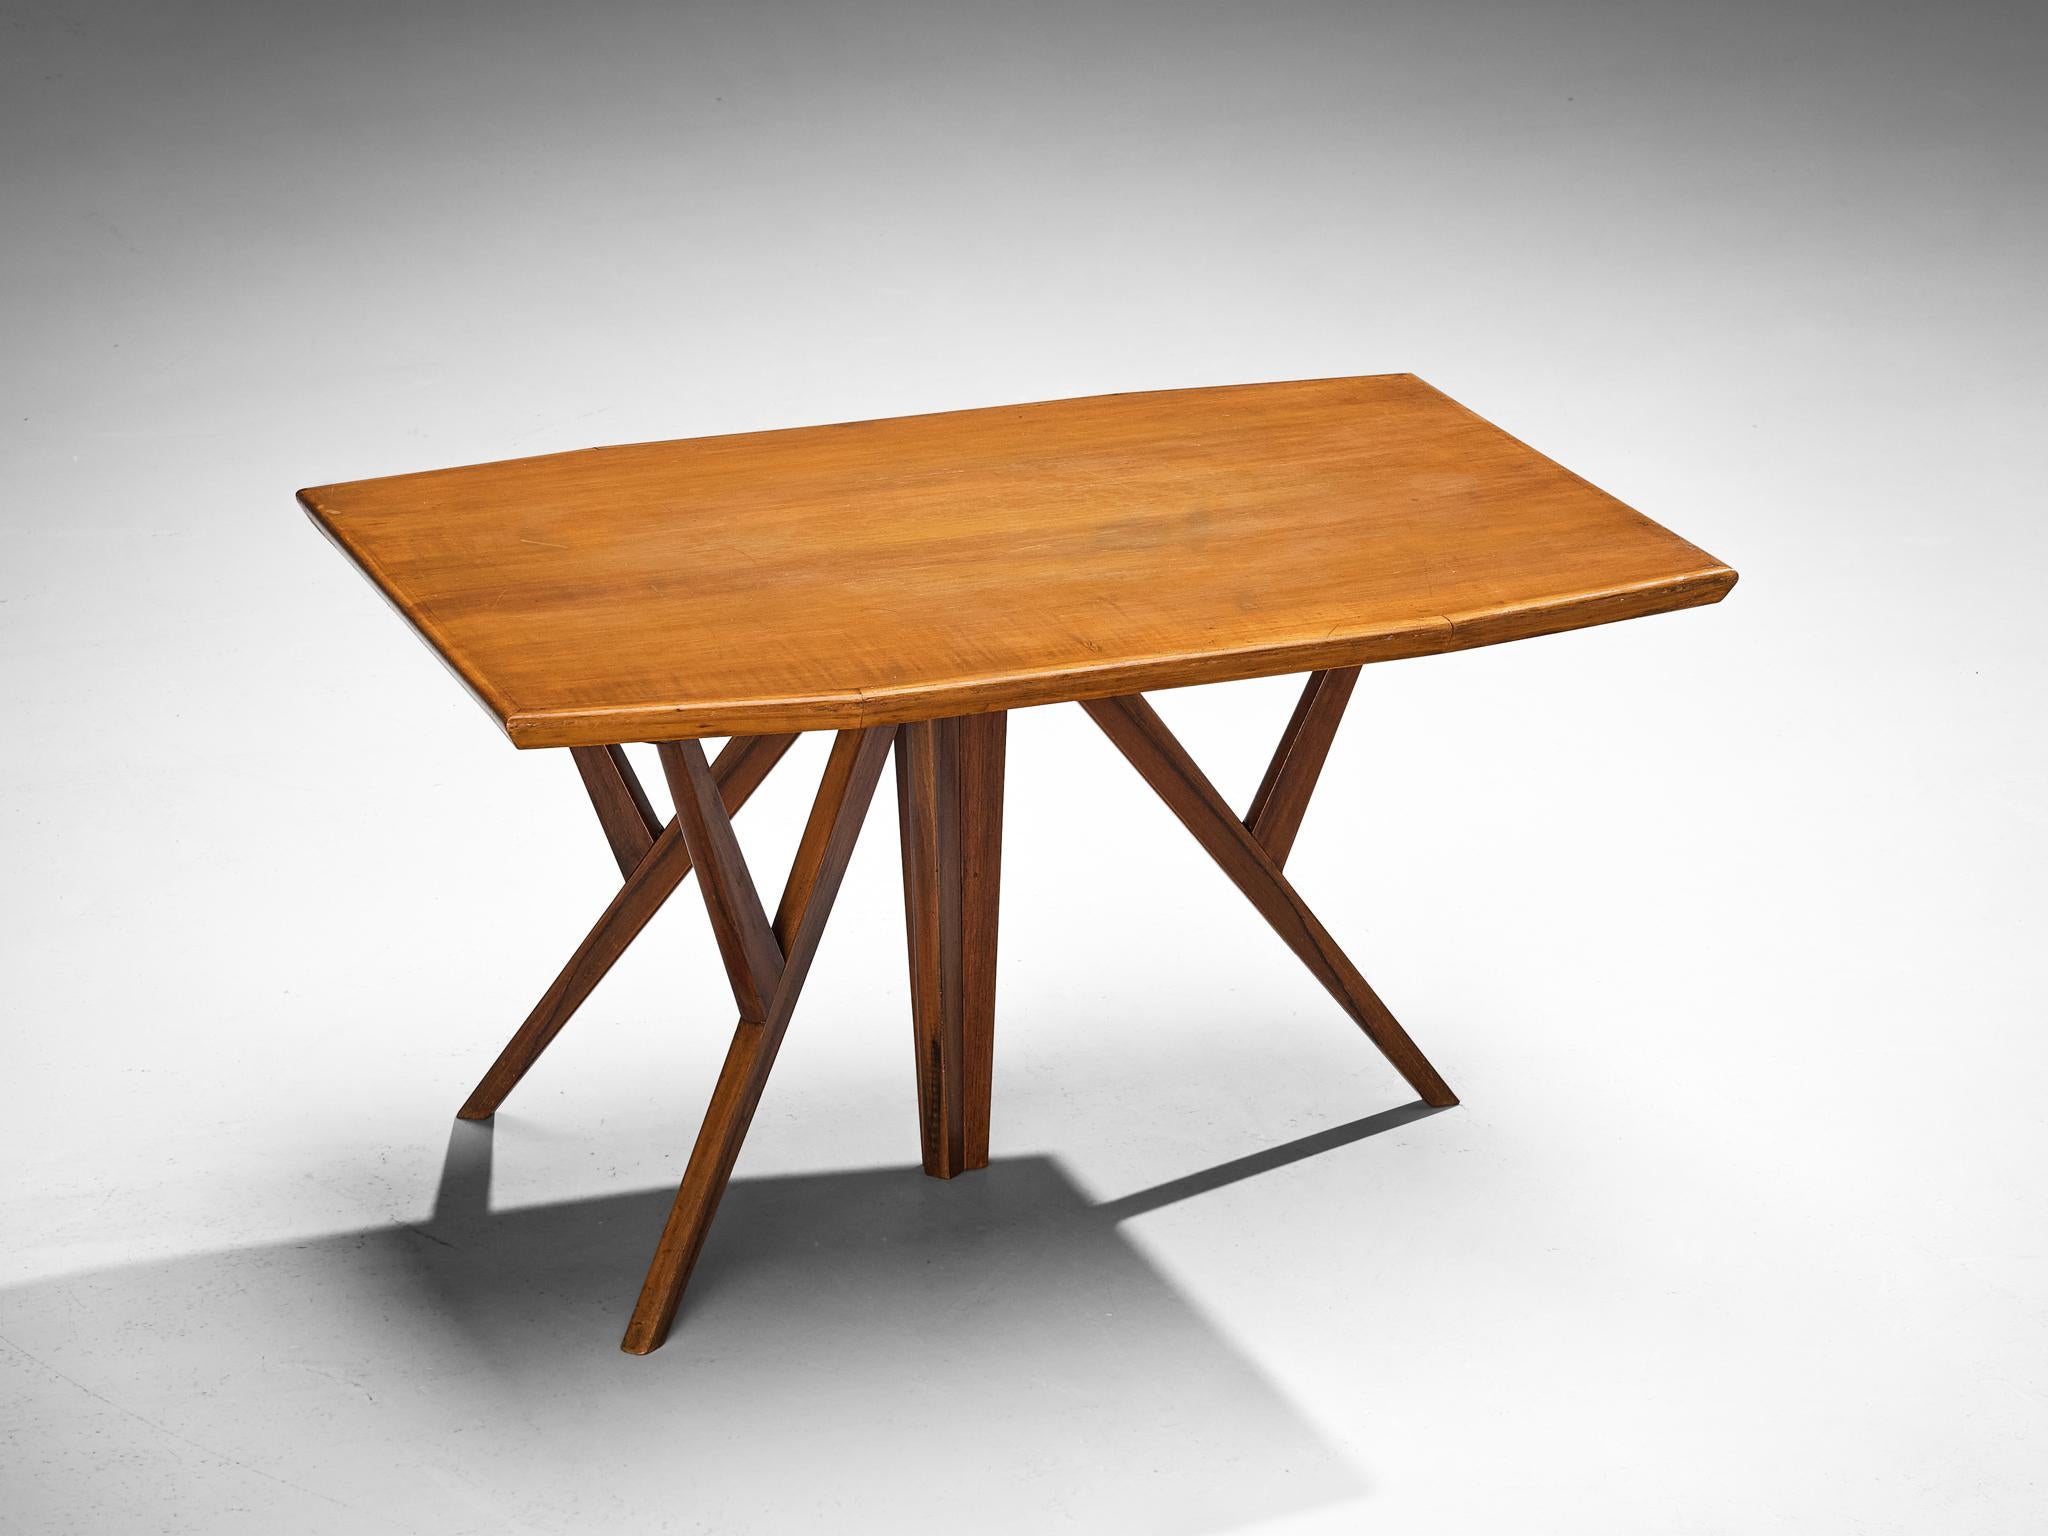 Gustavo & Vito Latis, coffee table, walnut, Italy, circa 1960

A truly exceptional coffee table of Italian origin, employing 1950s and 1960s Mid-Century Modern aesthetic vocabulary and typical woodwork of that period. The tabletop is shaped in a